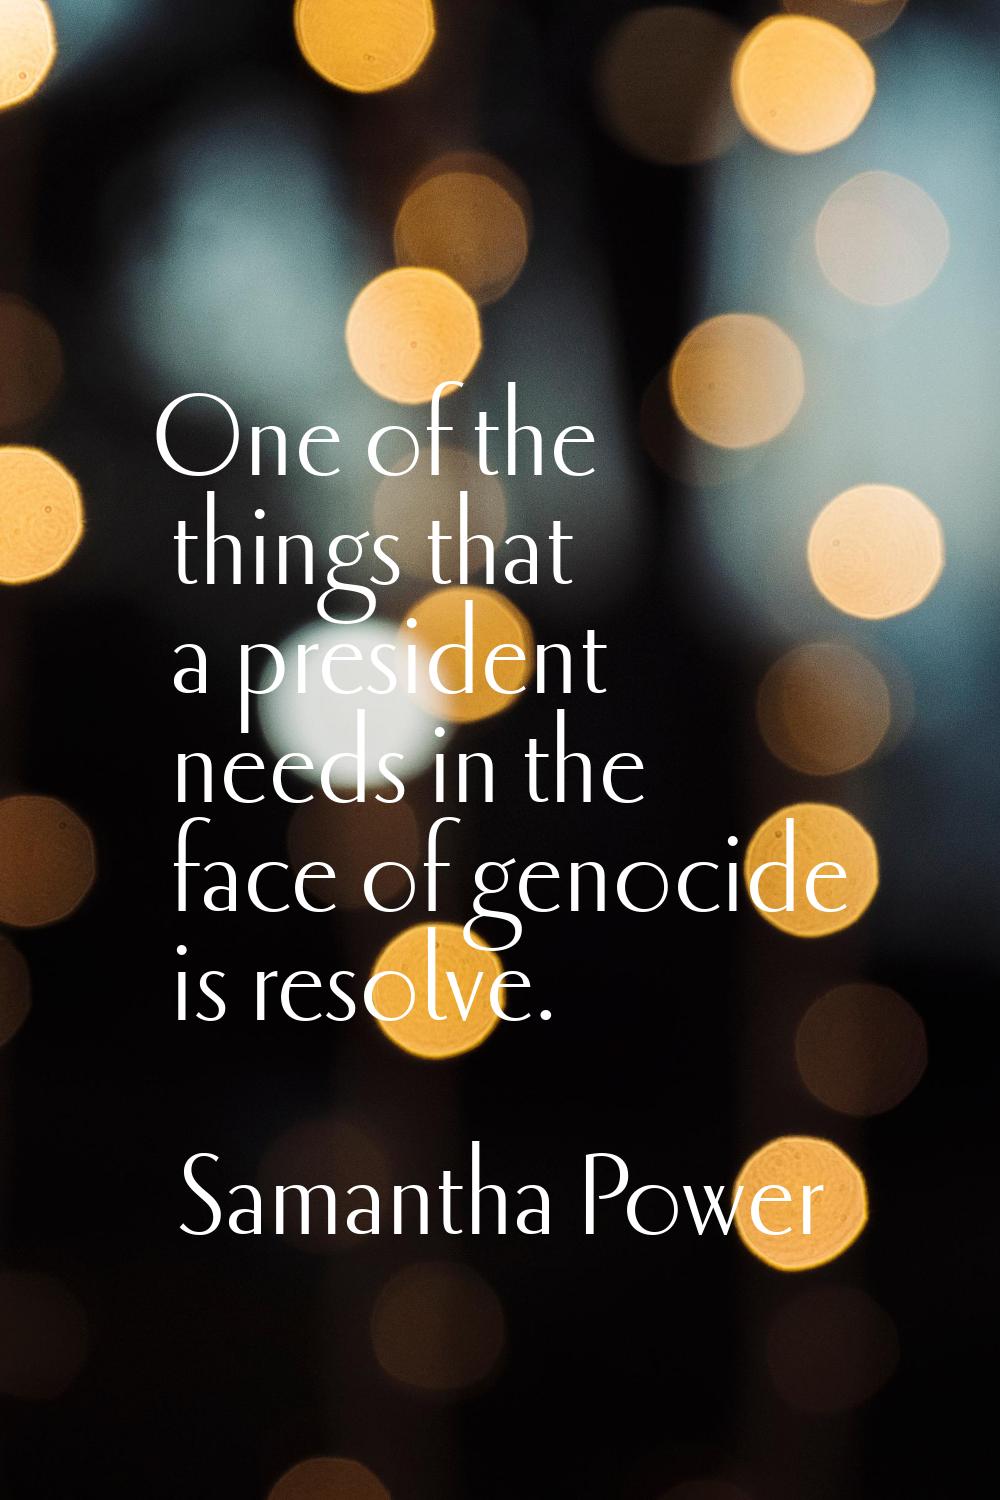 One of the things that a president needs in the face of genocide is resolve.